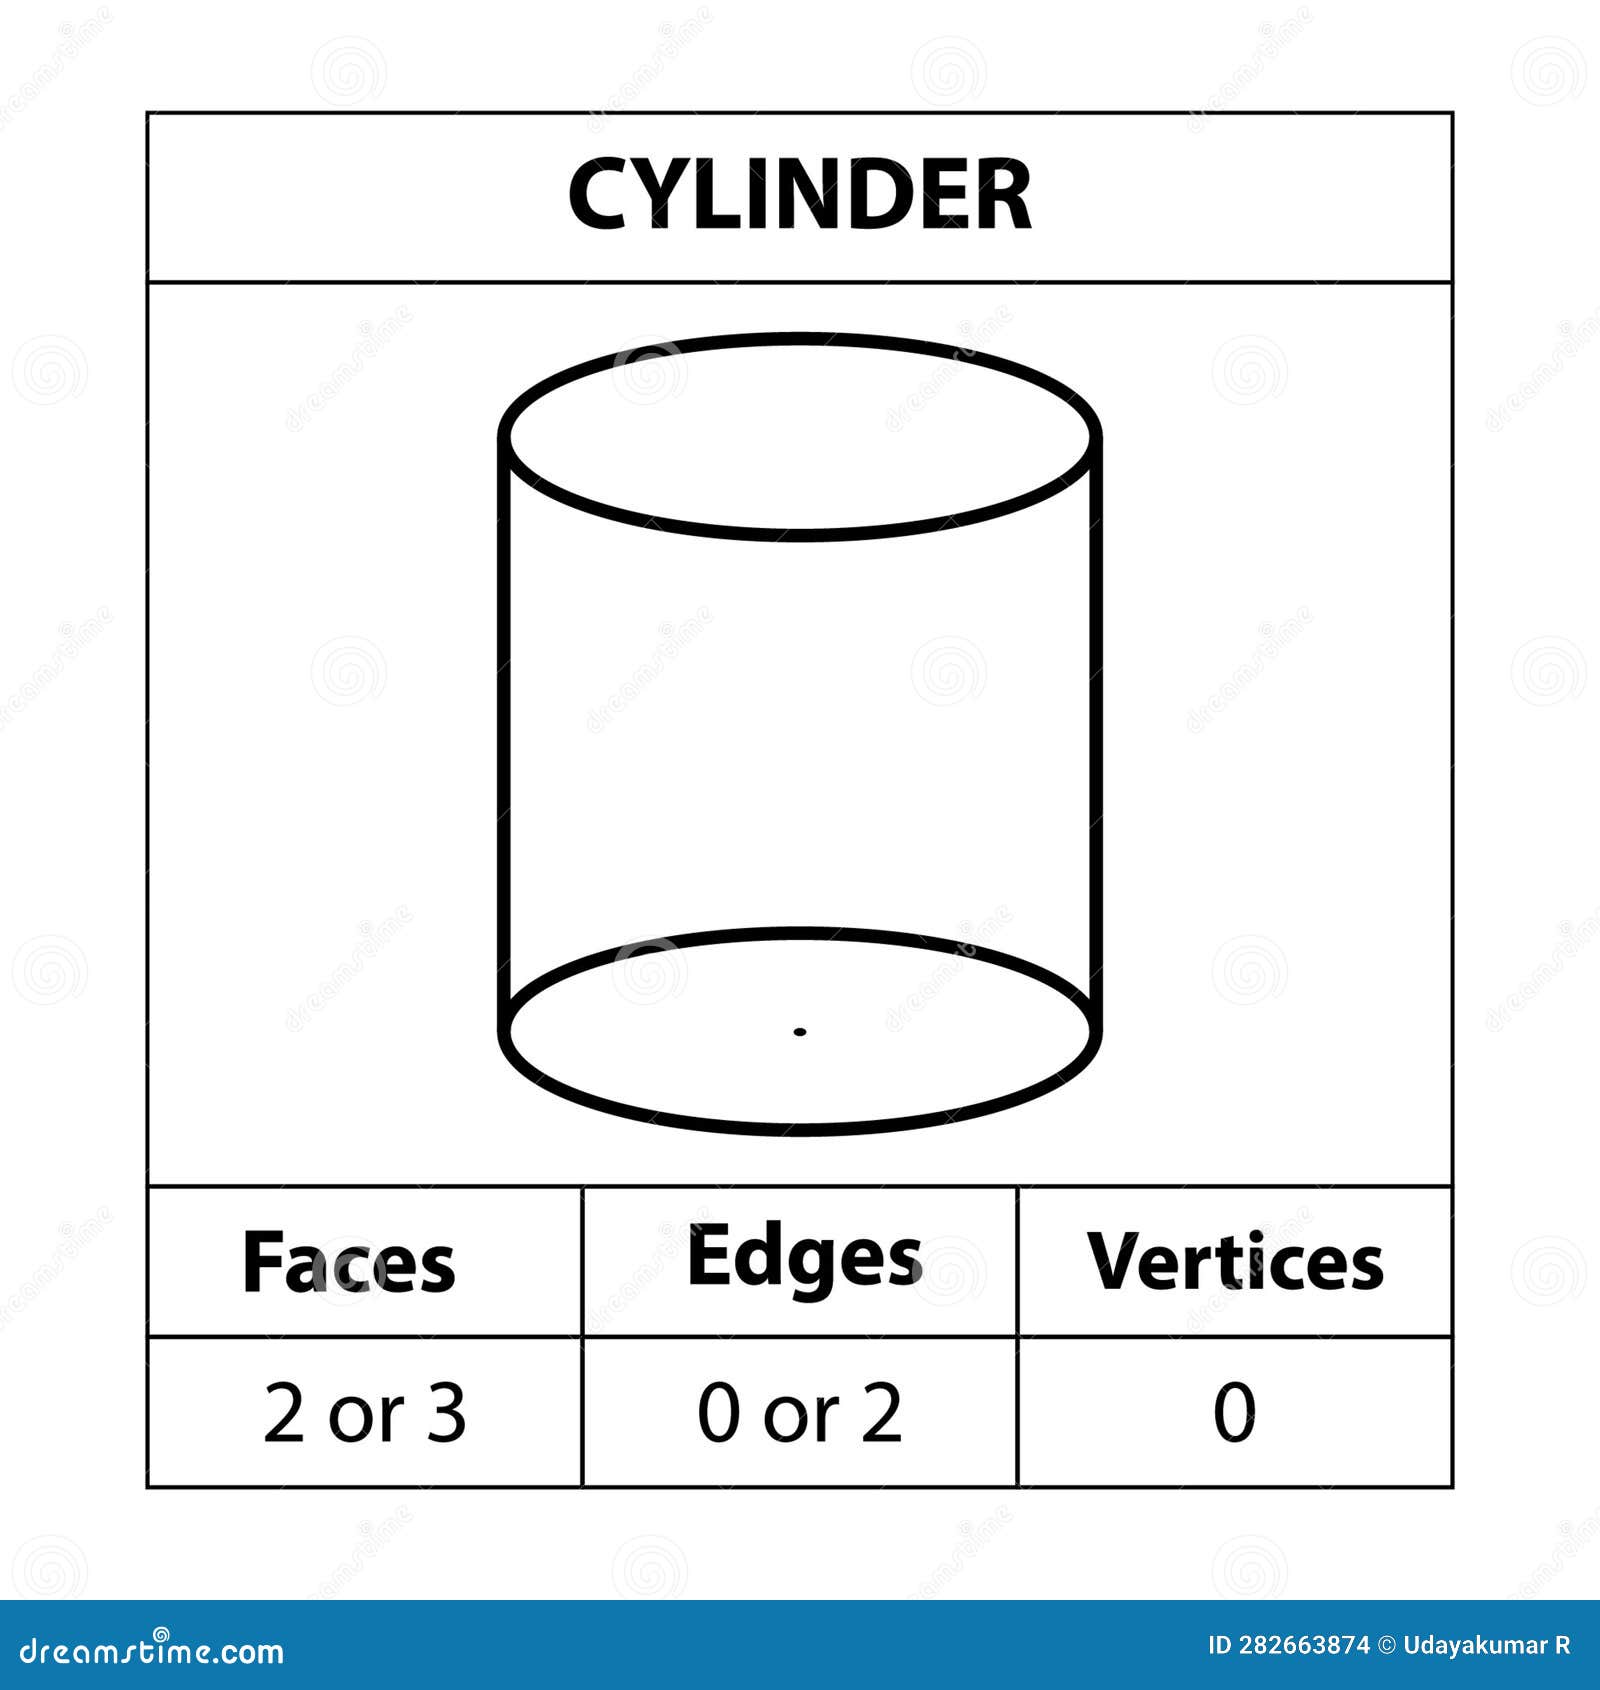 how many vertices of cylinder